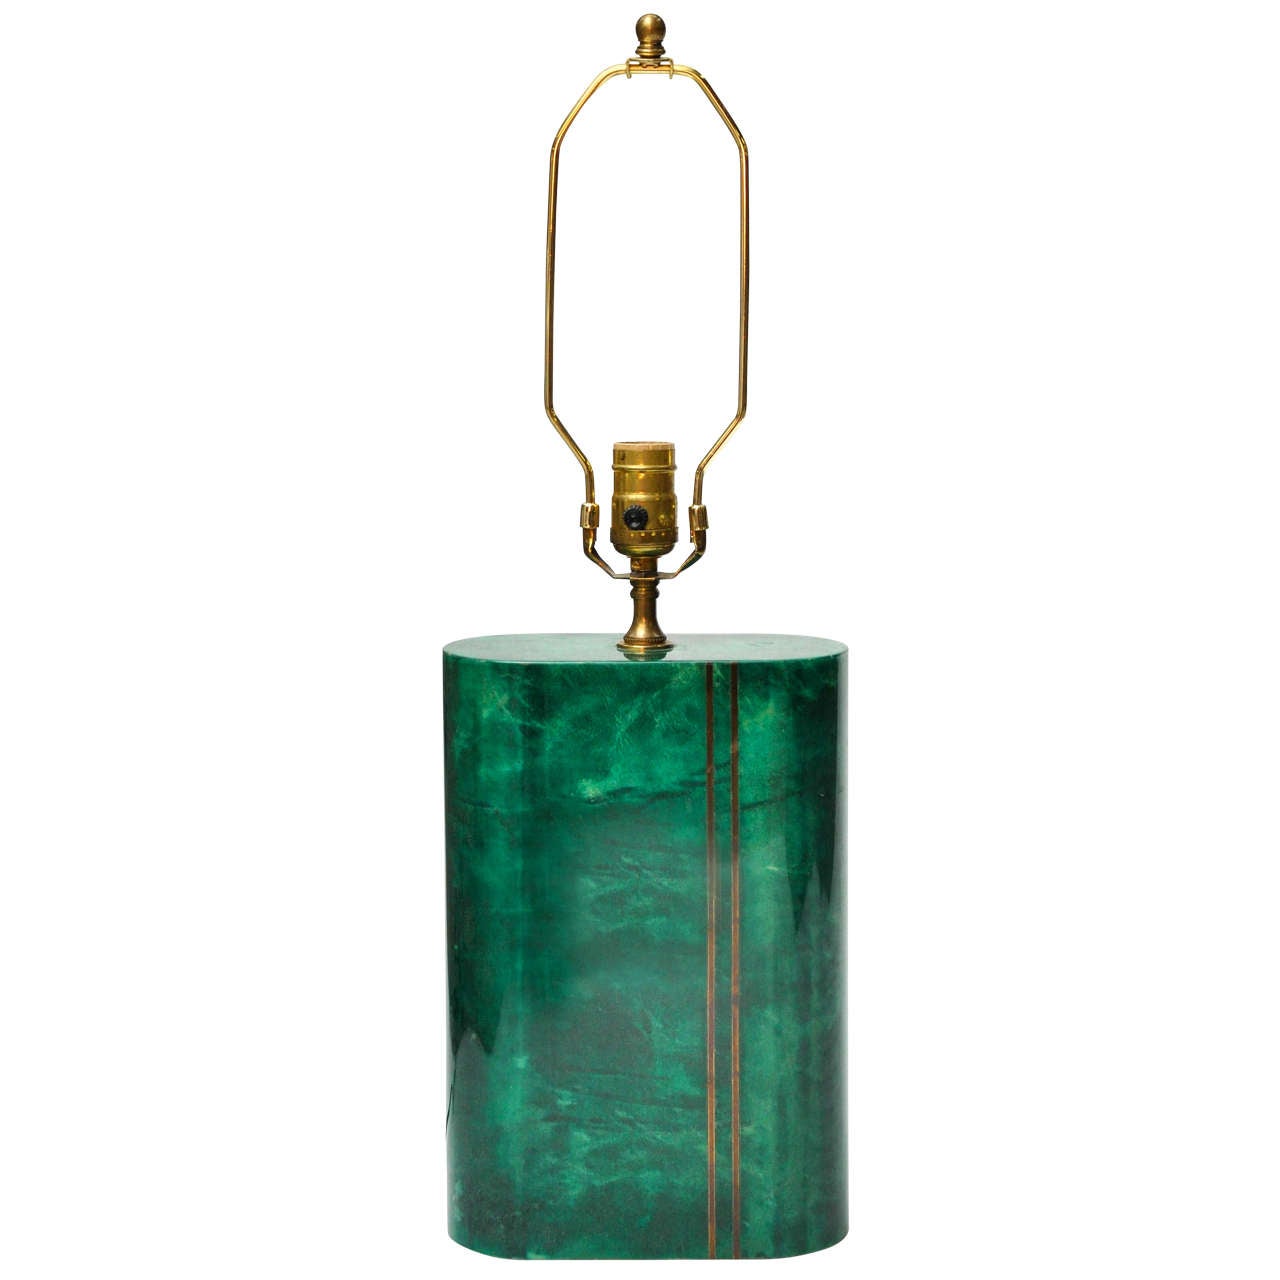 Aldo Tura Green Parchment and Brass Table Lamp